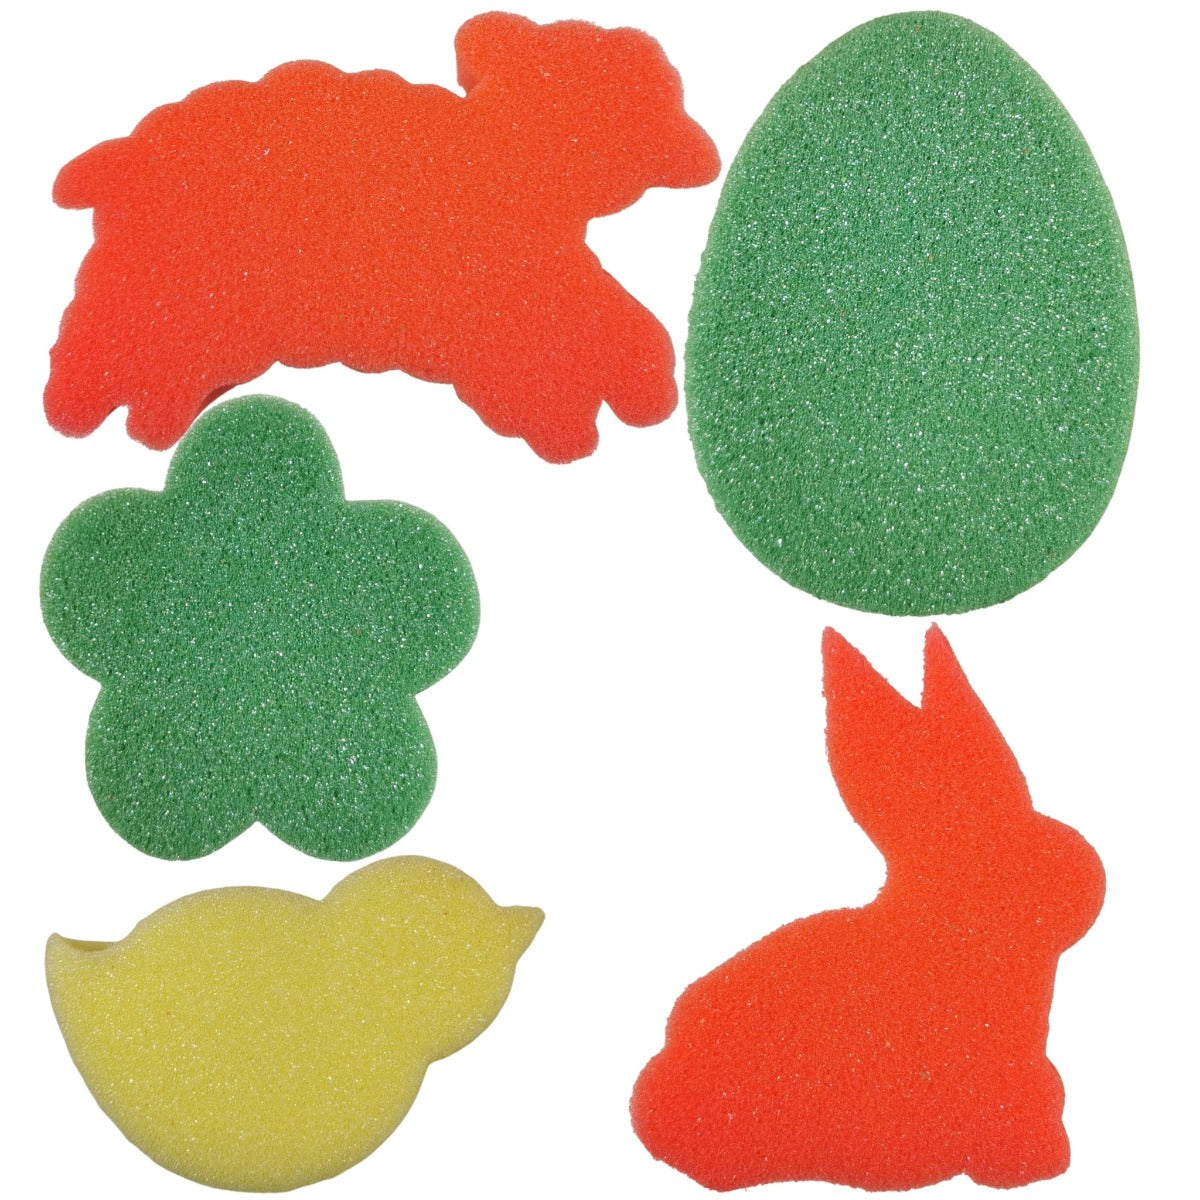 Farm Yard Animal Painting Sponges Set for Kids Craft Printing Pack of 5  Shapes 